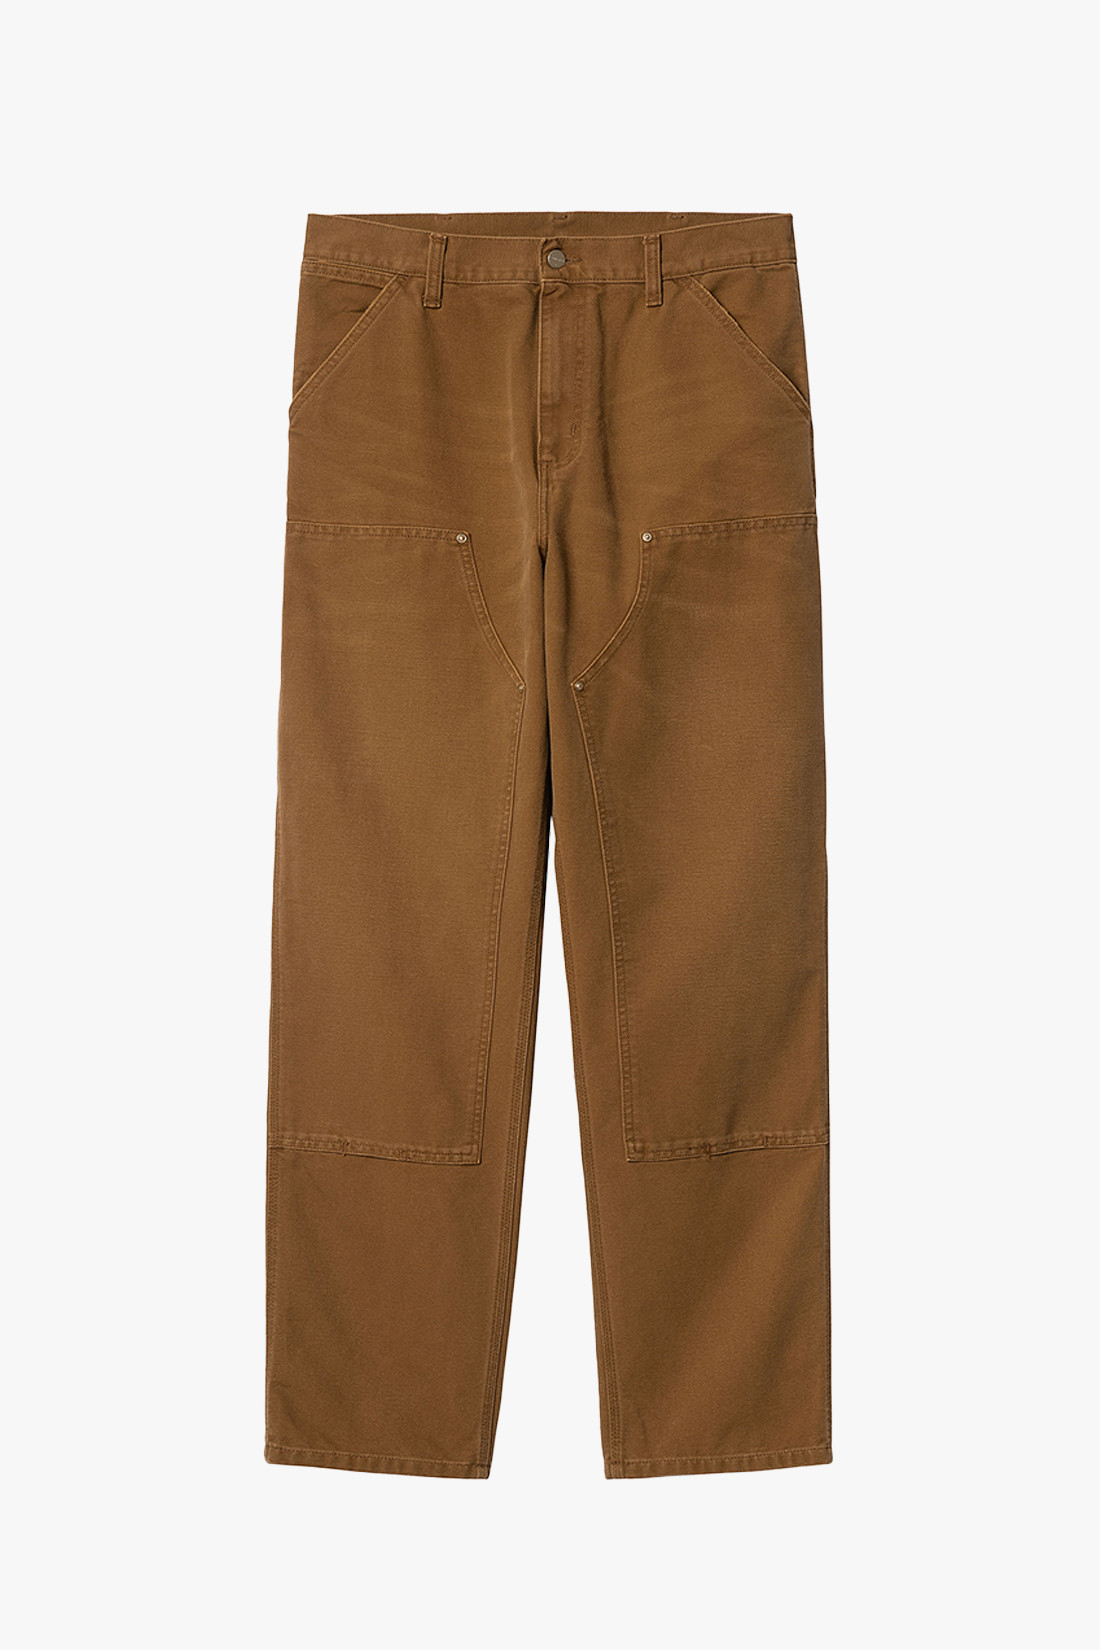 Double knee pant Brown aged canvas